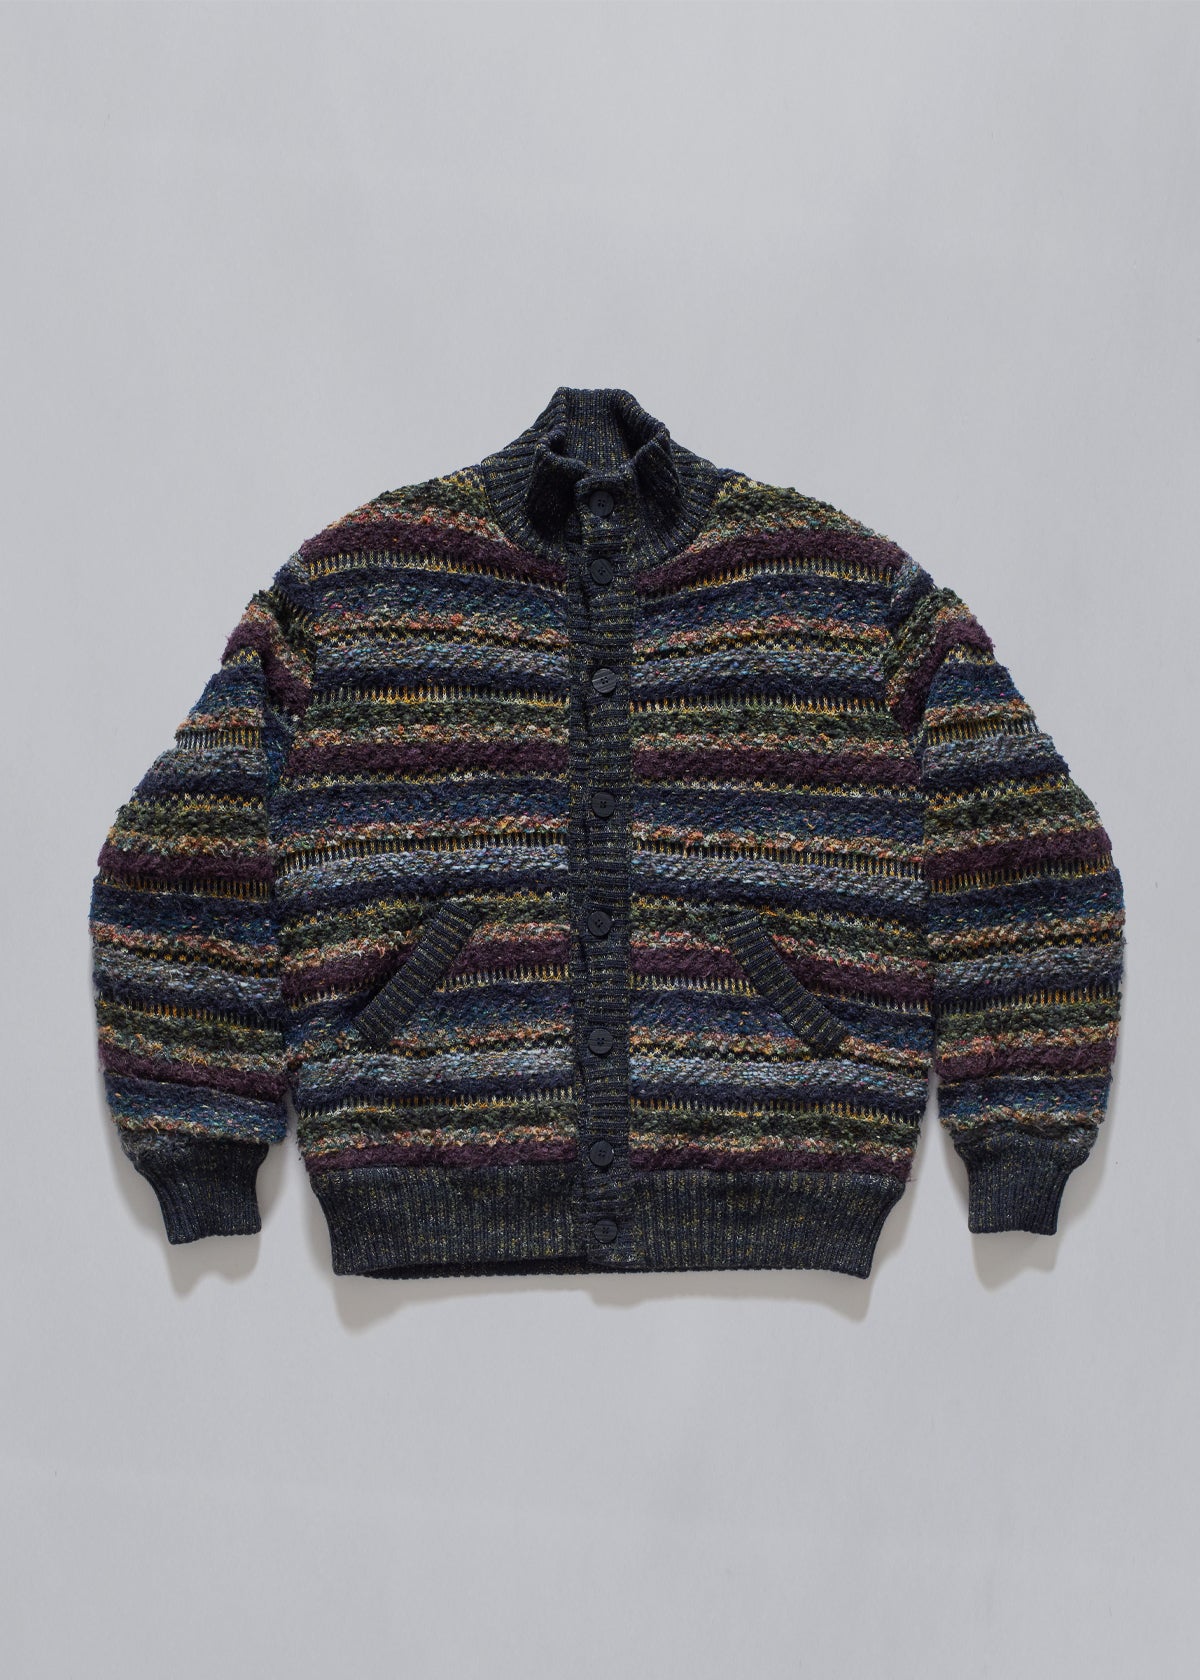 Boucle Wool Reversible Cardigan 1980's - X-Large - The Archivist Store